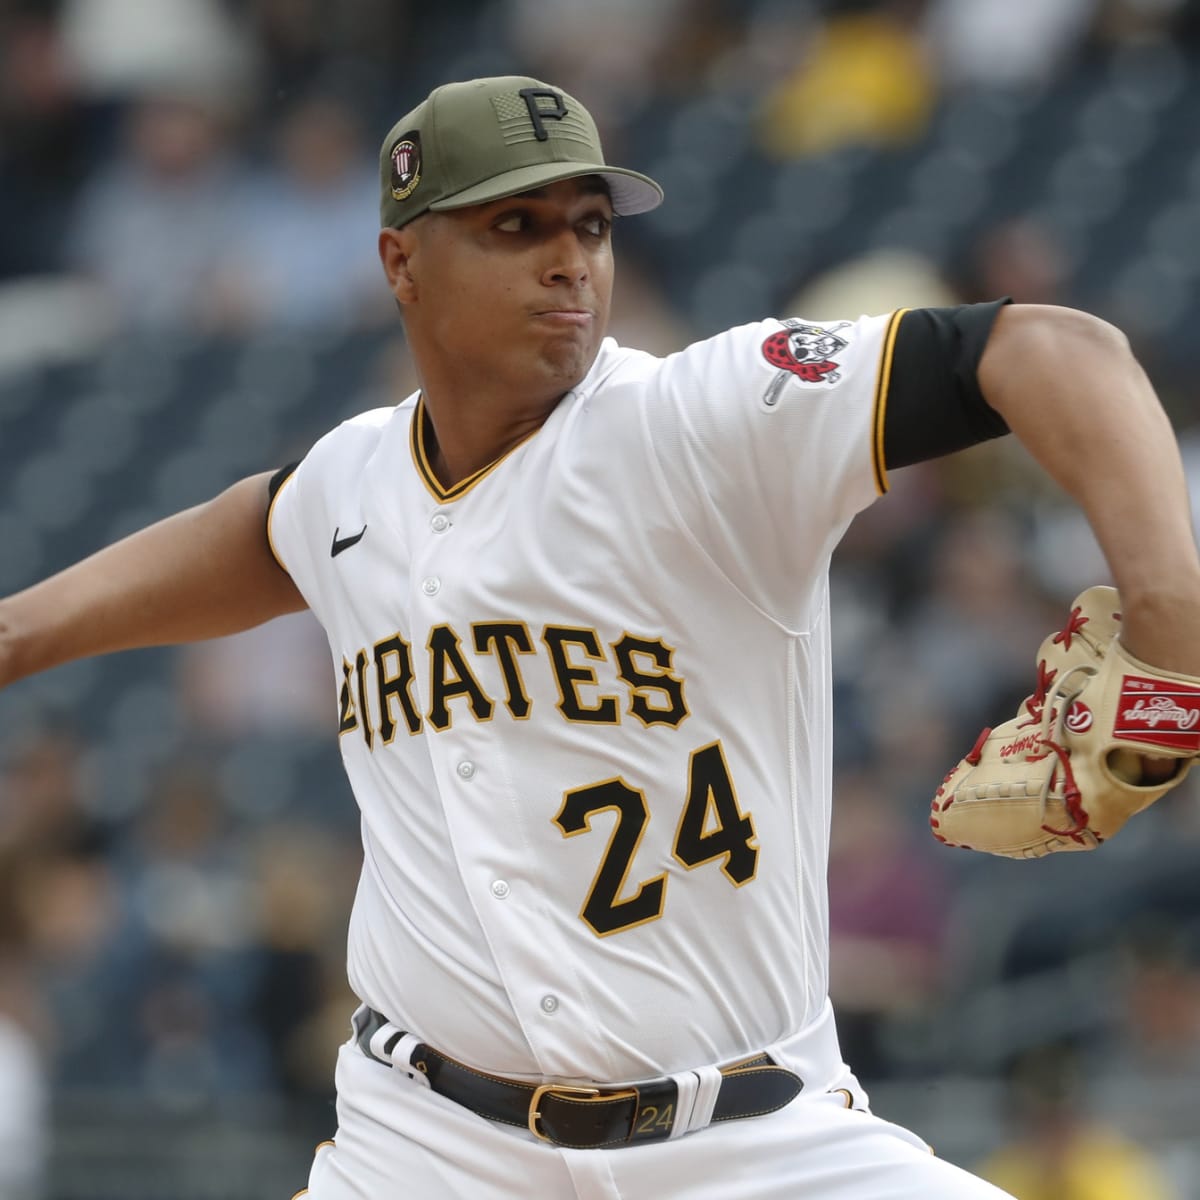 Pittsburgh Pirates Pitcher Accomplishes Rare Feat in Baseball History -  Fastball